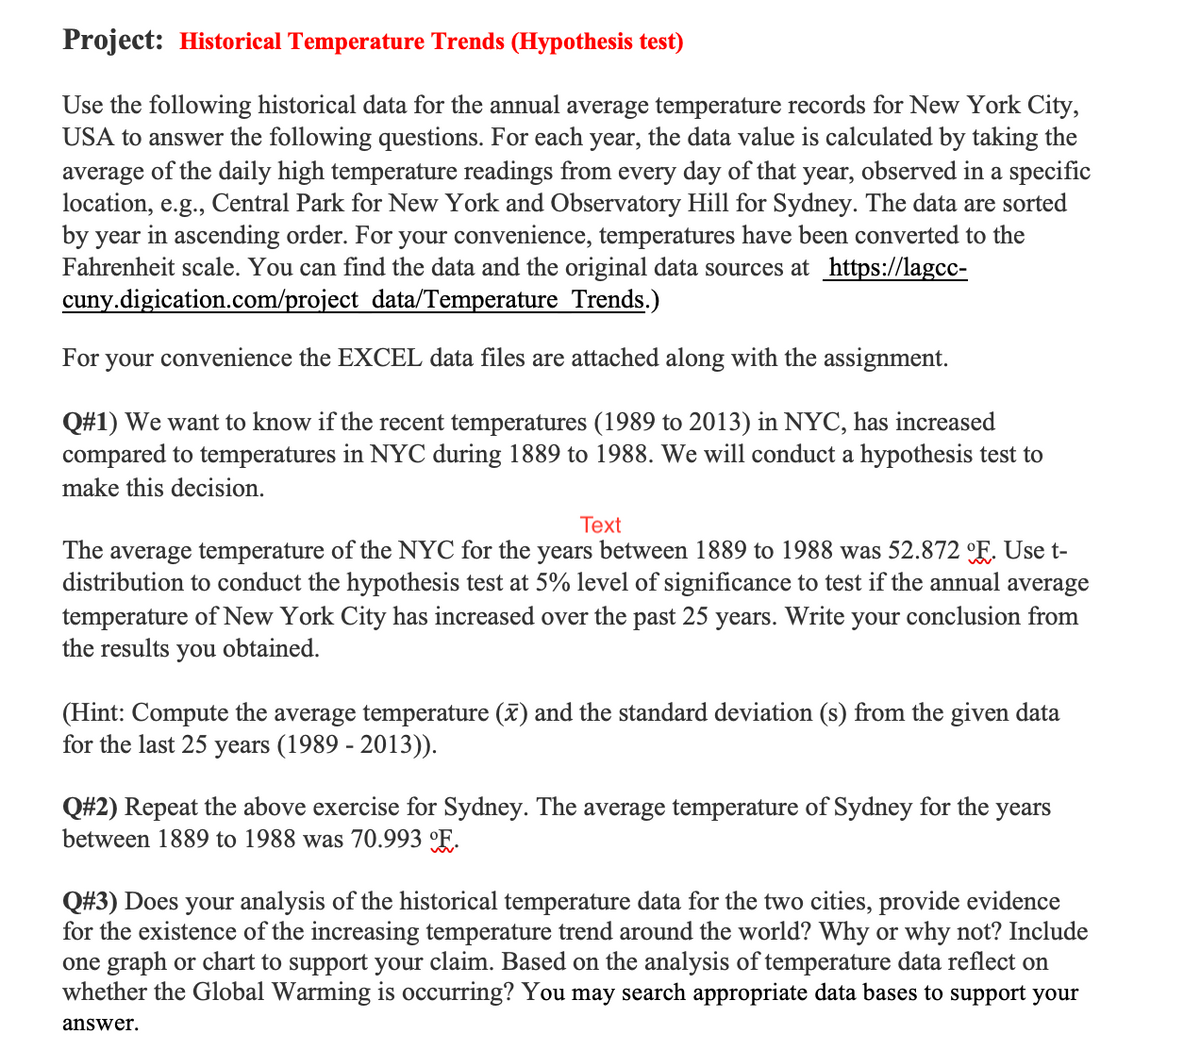 Project: Historical Temperature Trends (Hypothesis test)
Use the following historical data for the annual average temperature records for New York City,
USA to answer the following questions. For each year, the data value is calculated by taking the
average of the daily high temperature readings from every day of that year, observed in a specific
location, e.g., Central Park for New York and Observatory Hill for Sydney. The data are sorted
by year in ascending order. For your convenience, temperatures have been converted to the
Fahrenheit scale. You can find the data and the original data sources at https://lagcc-
cuny.digication.com/project data/Temperature Trends.)
For your convenience the EXCEL data files are attached along with the assignment.
Q#1) We want to know if the recent temperatures (1989 to 2013) in NYC, has increased
compared to temperatures in NYC during 1889 to 1988. We will conduct a hypothesis test to
make this decision.
Text
The average temperature of the NYC for the years between 1889 to 1988 was 52.872 E. Use t-
distribution to conduct the hypothesis test at 5% level of significance to test if the annual average
temperature of New York City has increased over the past 25
years. Write your conclusion from
the results you obtained.
(Hint: Compute the average temperature (x) and the standard deviation (s) from the given data
for the last 25 years (1989 - 2013)).
Q#2) Repeat the above exercise for Sydney. The average temperature of Sydney for the years
between 1889 to 1988 was 70.993 °F.
Q#3) Does your analysis of the historical temperature data for the two cities, provide evidence
for the existence of the increasing temperature trend around the world? Why or why not? Include
one graph or chart to support your claim. Based on the analysis of temperature data reflect on
whether the Global Warming is occurring? You may search appropriate data bases to support your
answer.